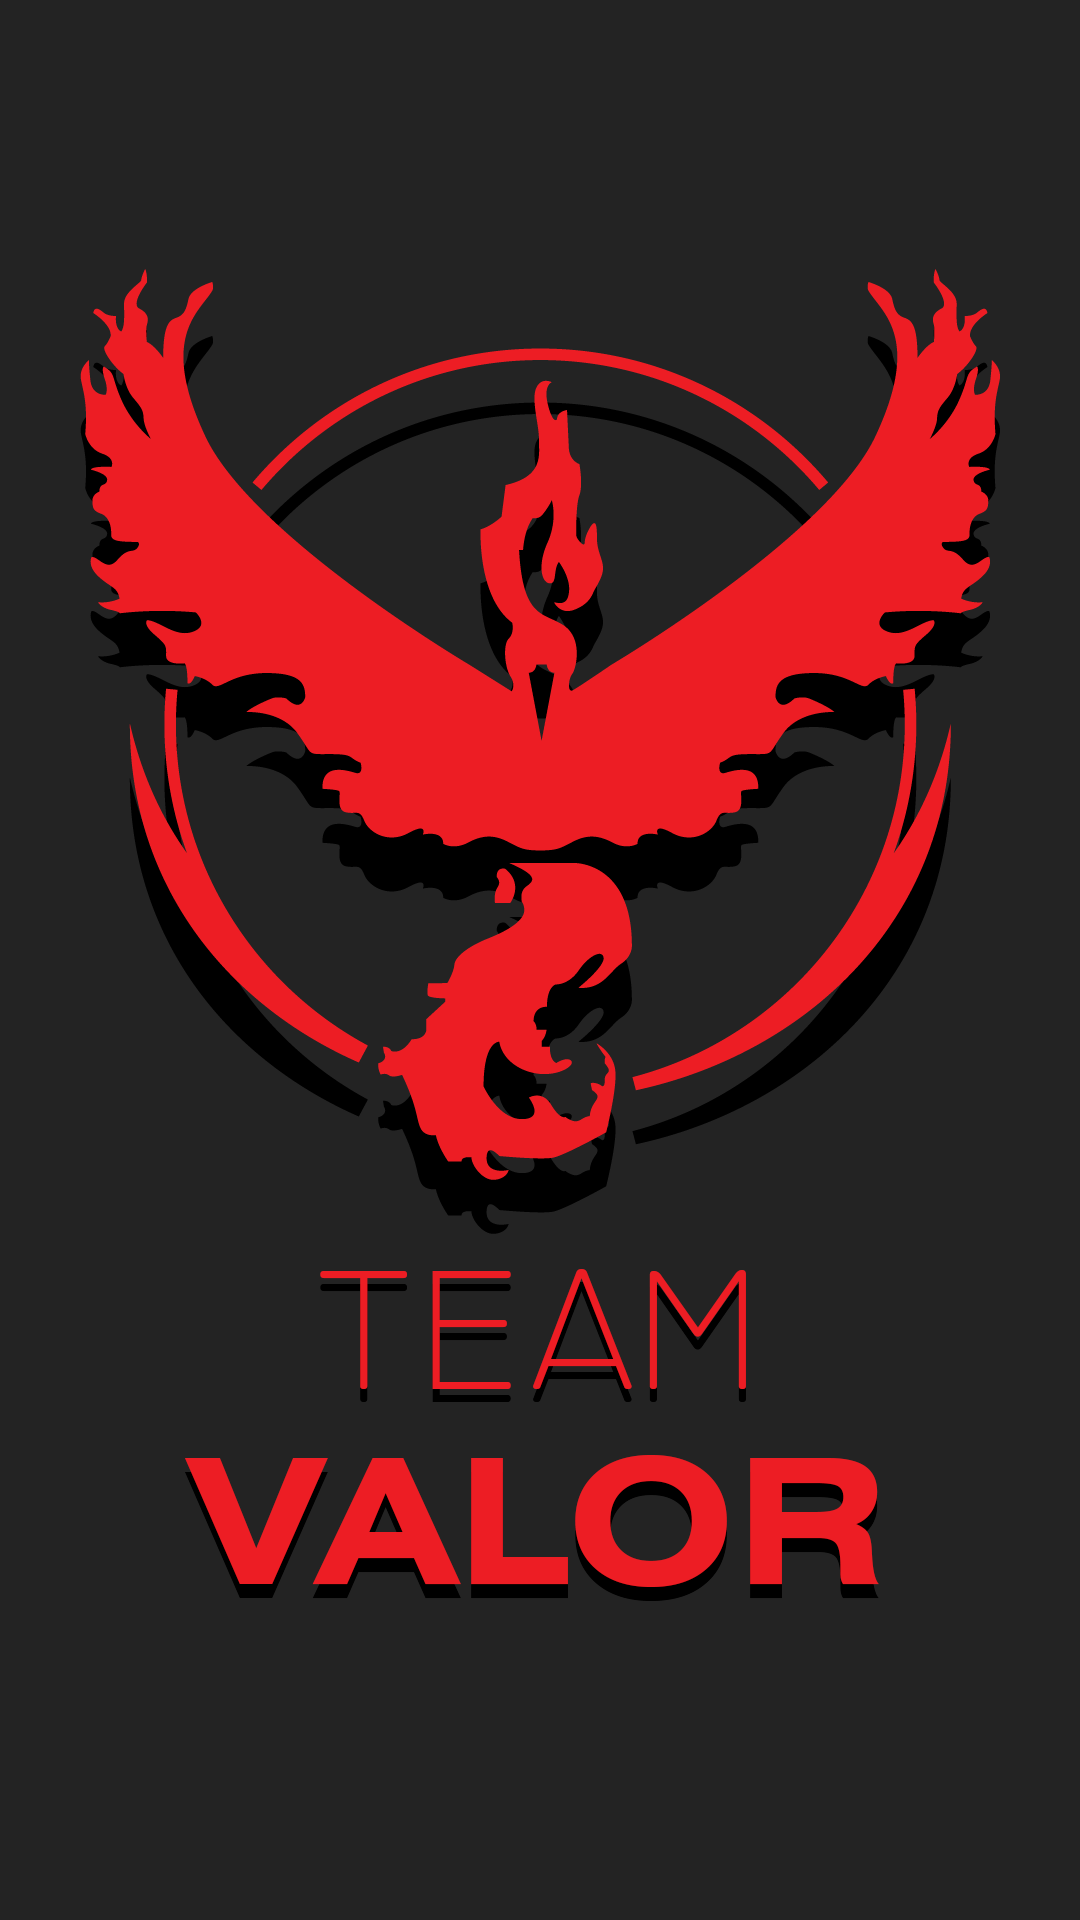 Made this Walpaper for Team Valor